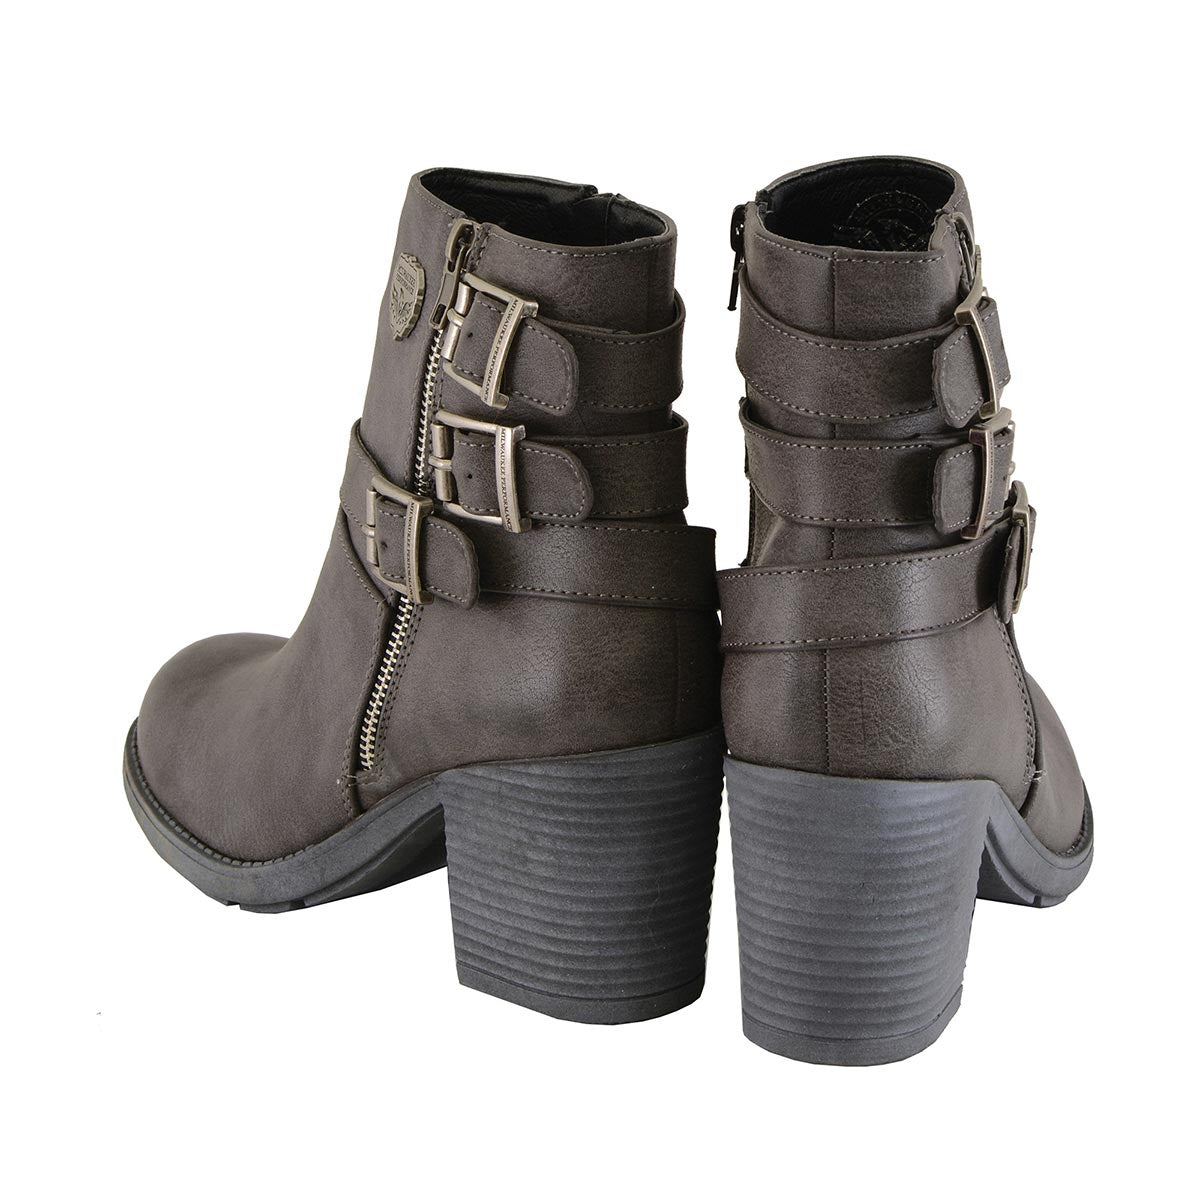 Milwaukee Leather MBL9406 Women's Stone Grey 3-Buckle Leather Boots with Platform Heel